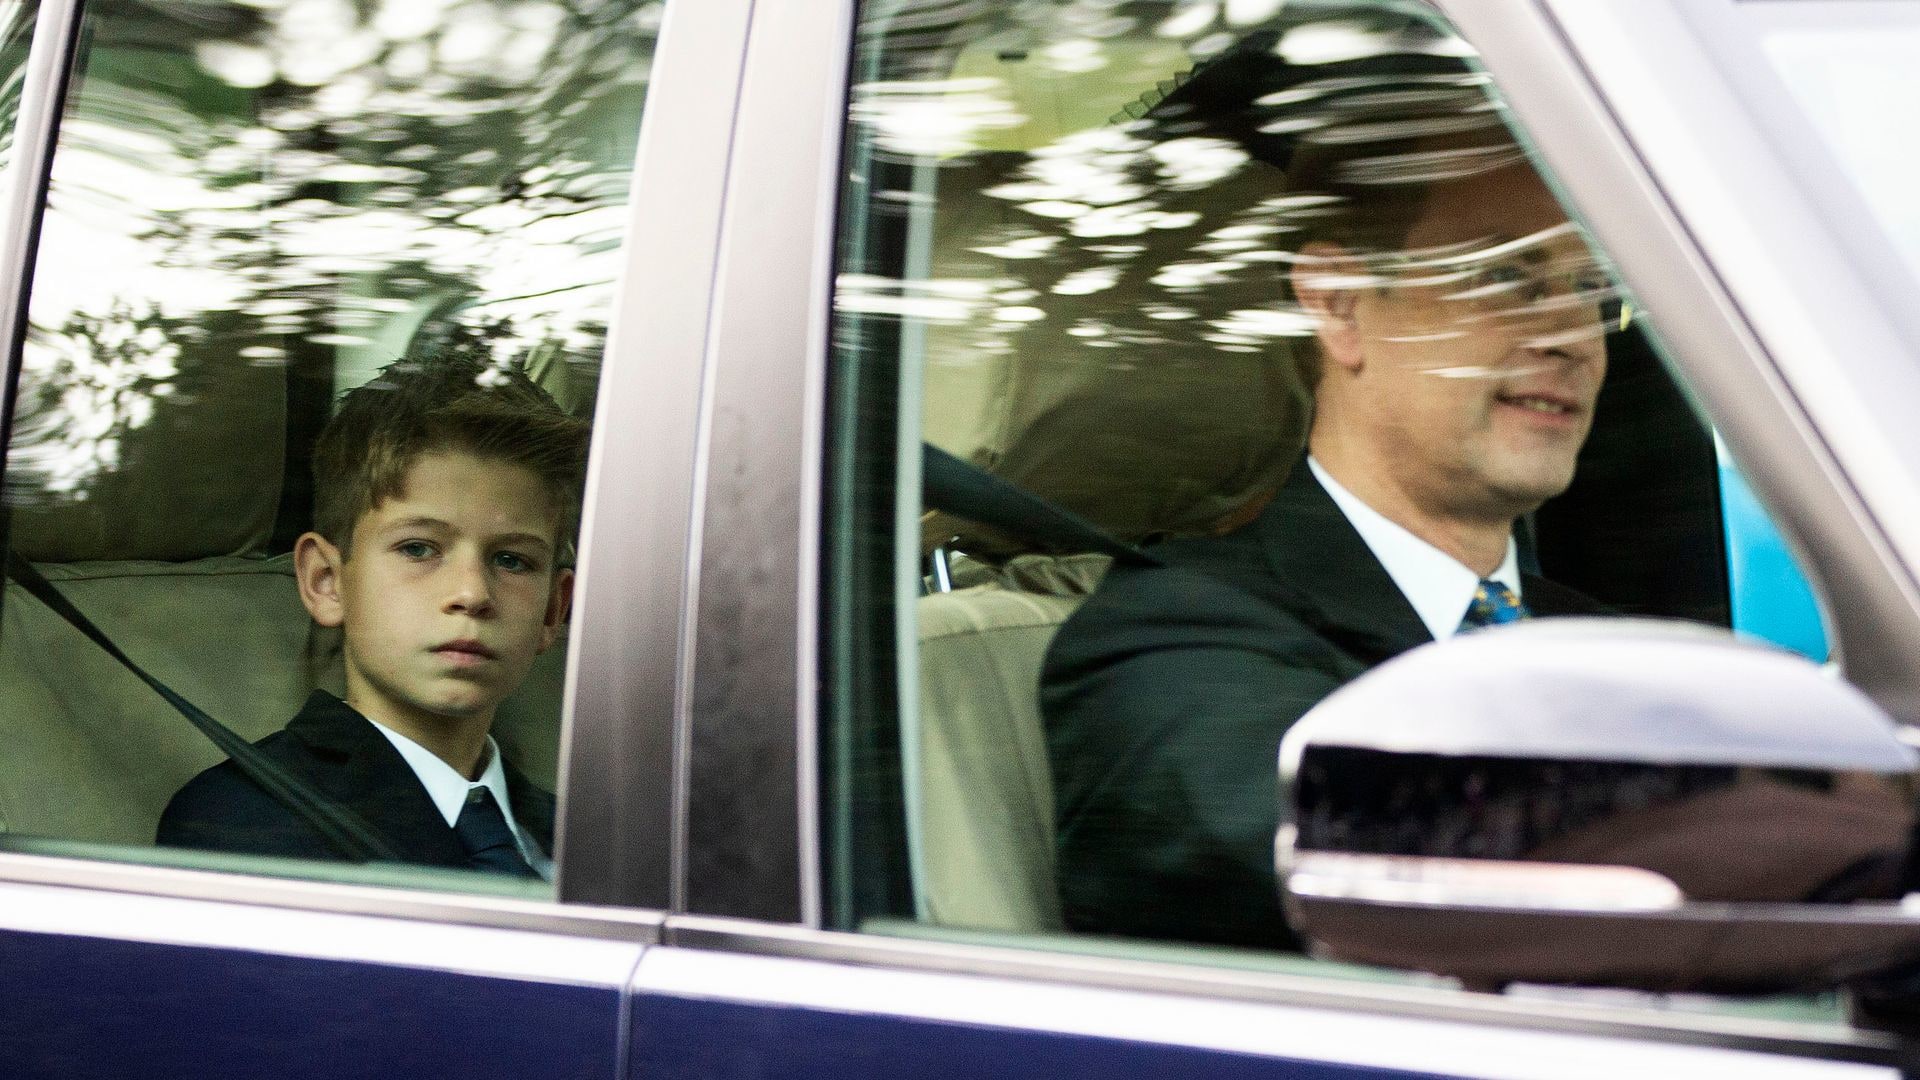 Prince Edward driving with James, Earl of Wessex in the back